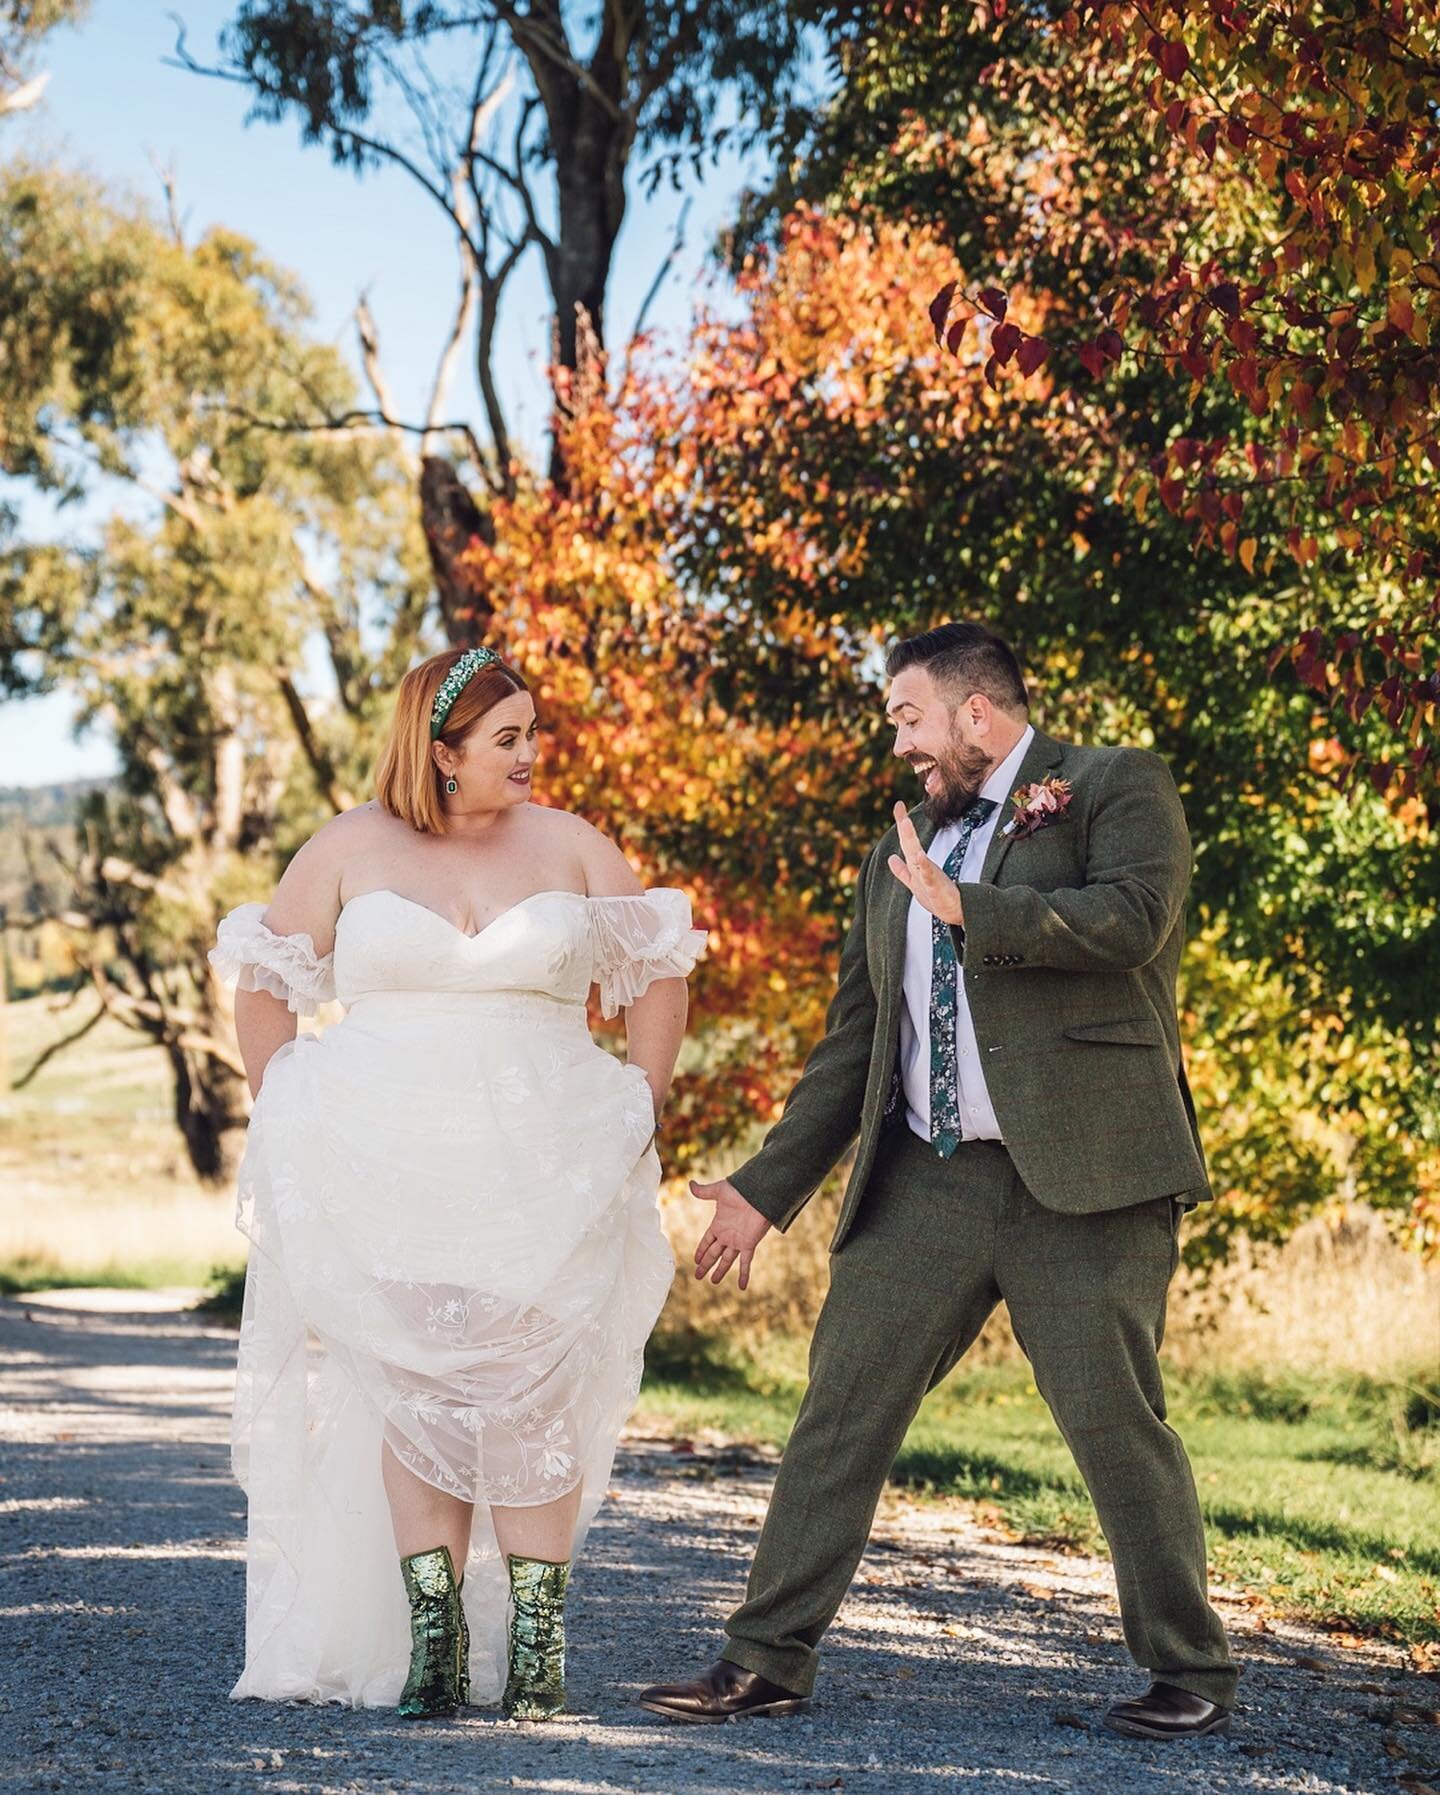 I finished my 2022/23 season of weddings with this adorable couple on the most spectacular autumn day. 

An intimate long lunch amongst the vines with a spectacular lineup of vendors. 

@swingingbridgewines 
@r_learmonth 
@celebrations_by_kate 
@flor